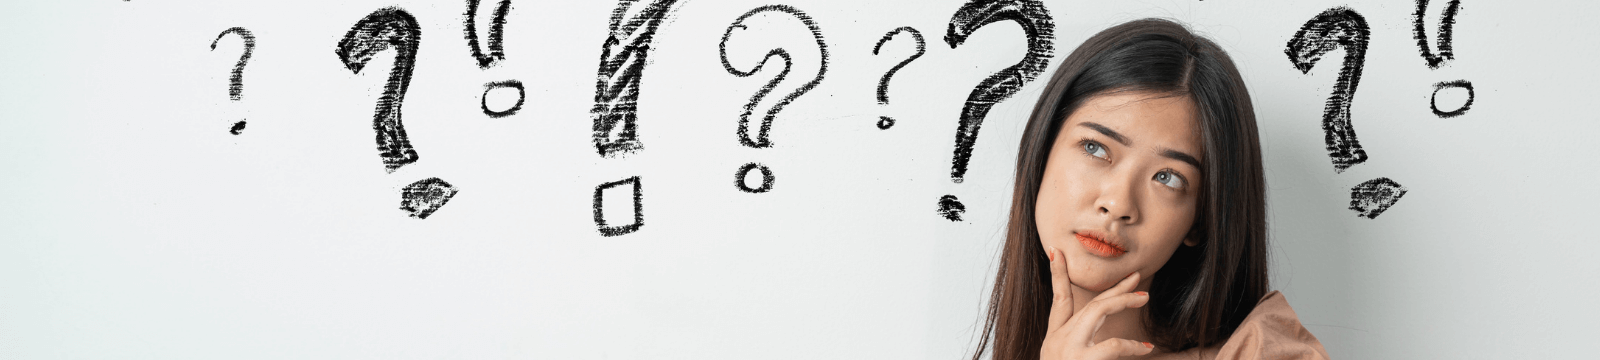 Lady with a puzzled look with question marks around her